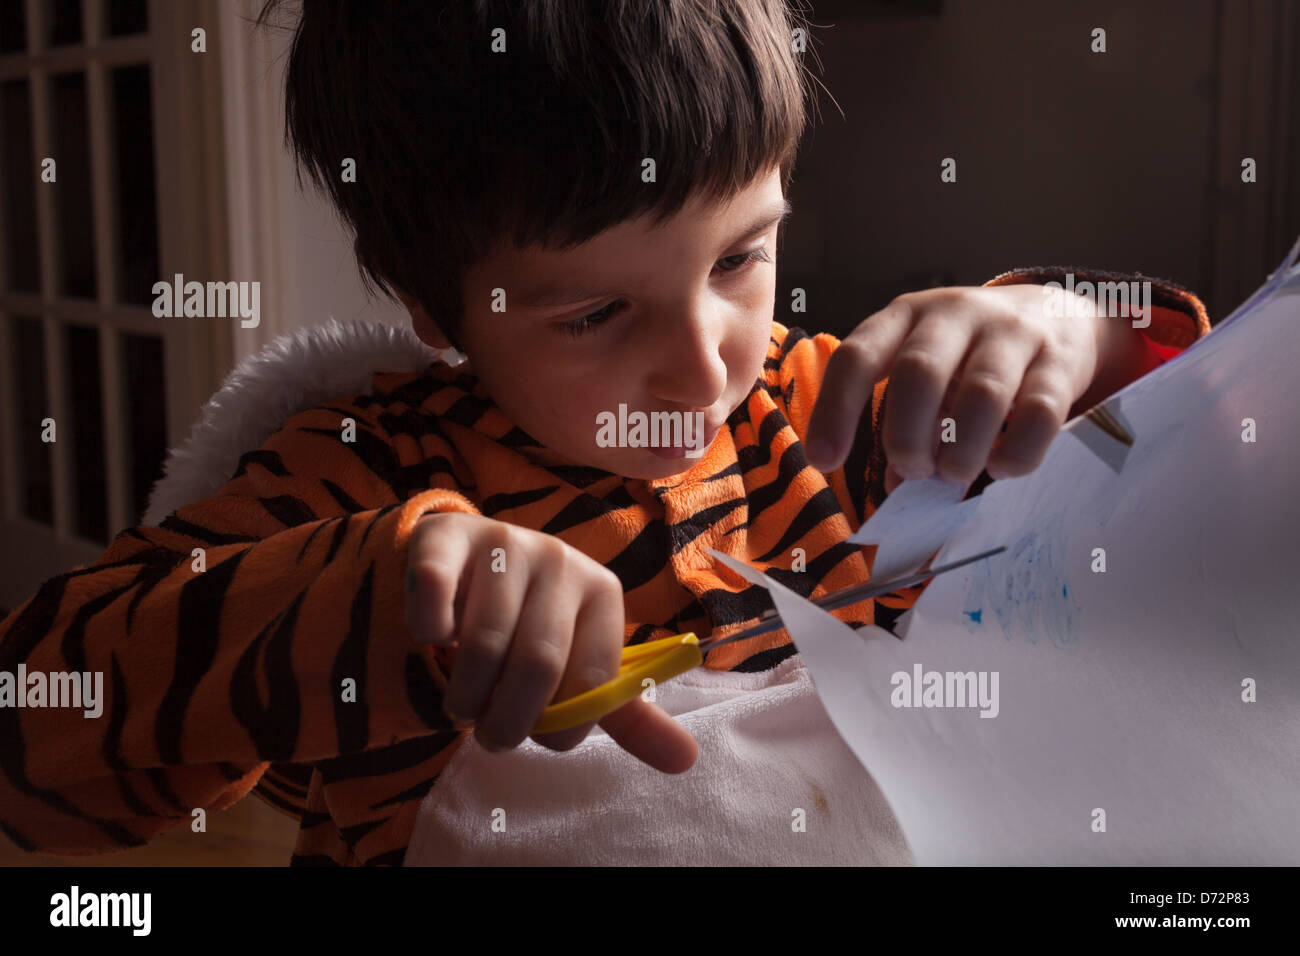 young boy in tiger costume cutting paper,World books day,London,UK Stock Photo